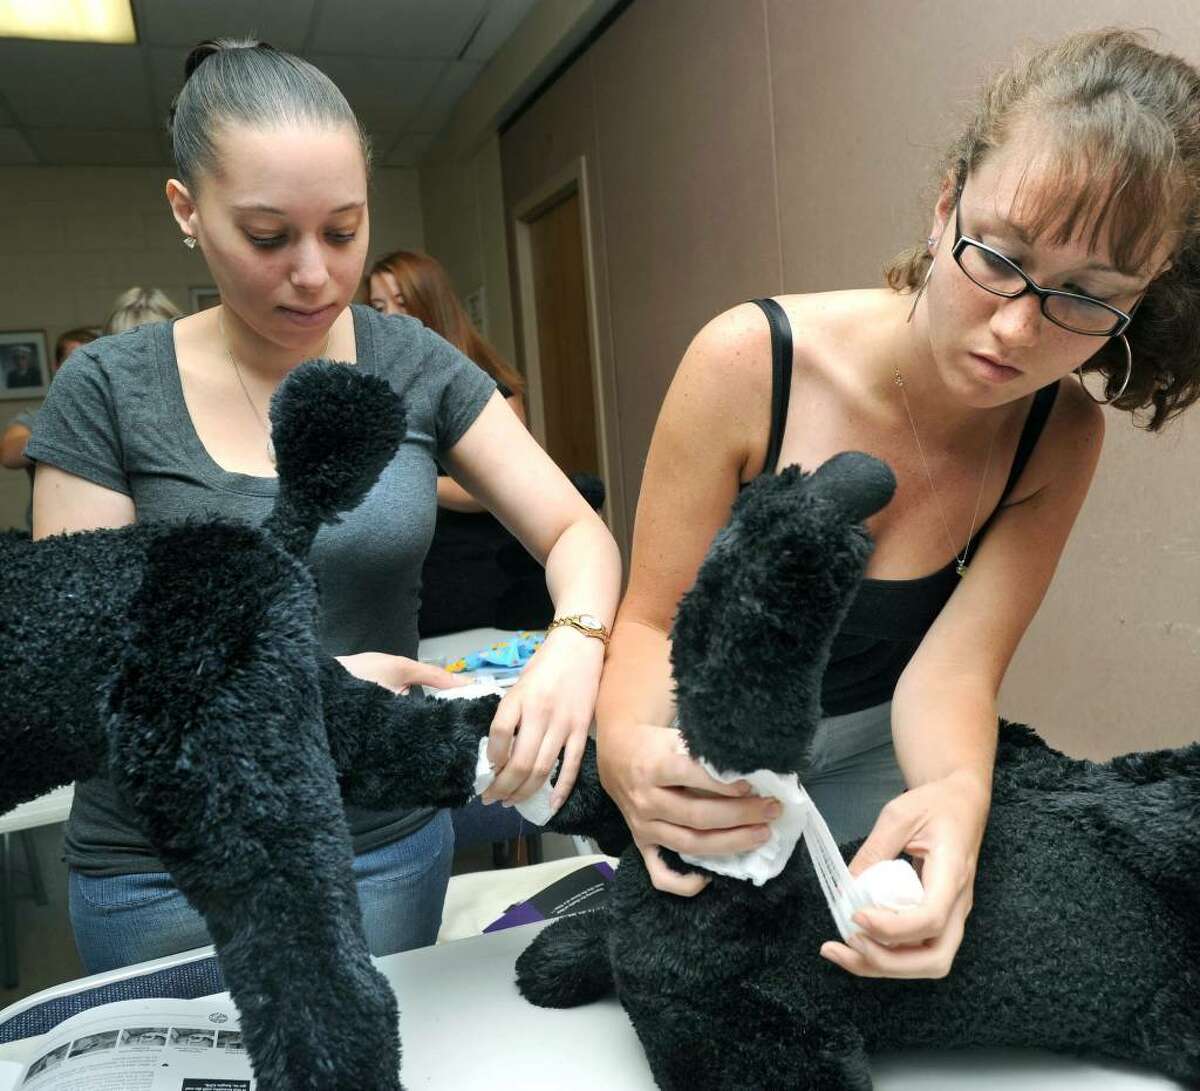 Jennifer Gutierrez, left, of Manhattan, and Jackie Buckley of New Fairfield practice pressure bandaging, a technique used for bleeding injuries such as cuts and scrapes, during a pet first aid class in Ridgefield Sunday, August 1, 2010.